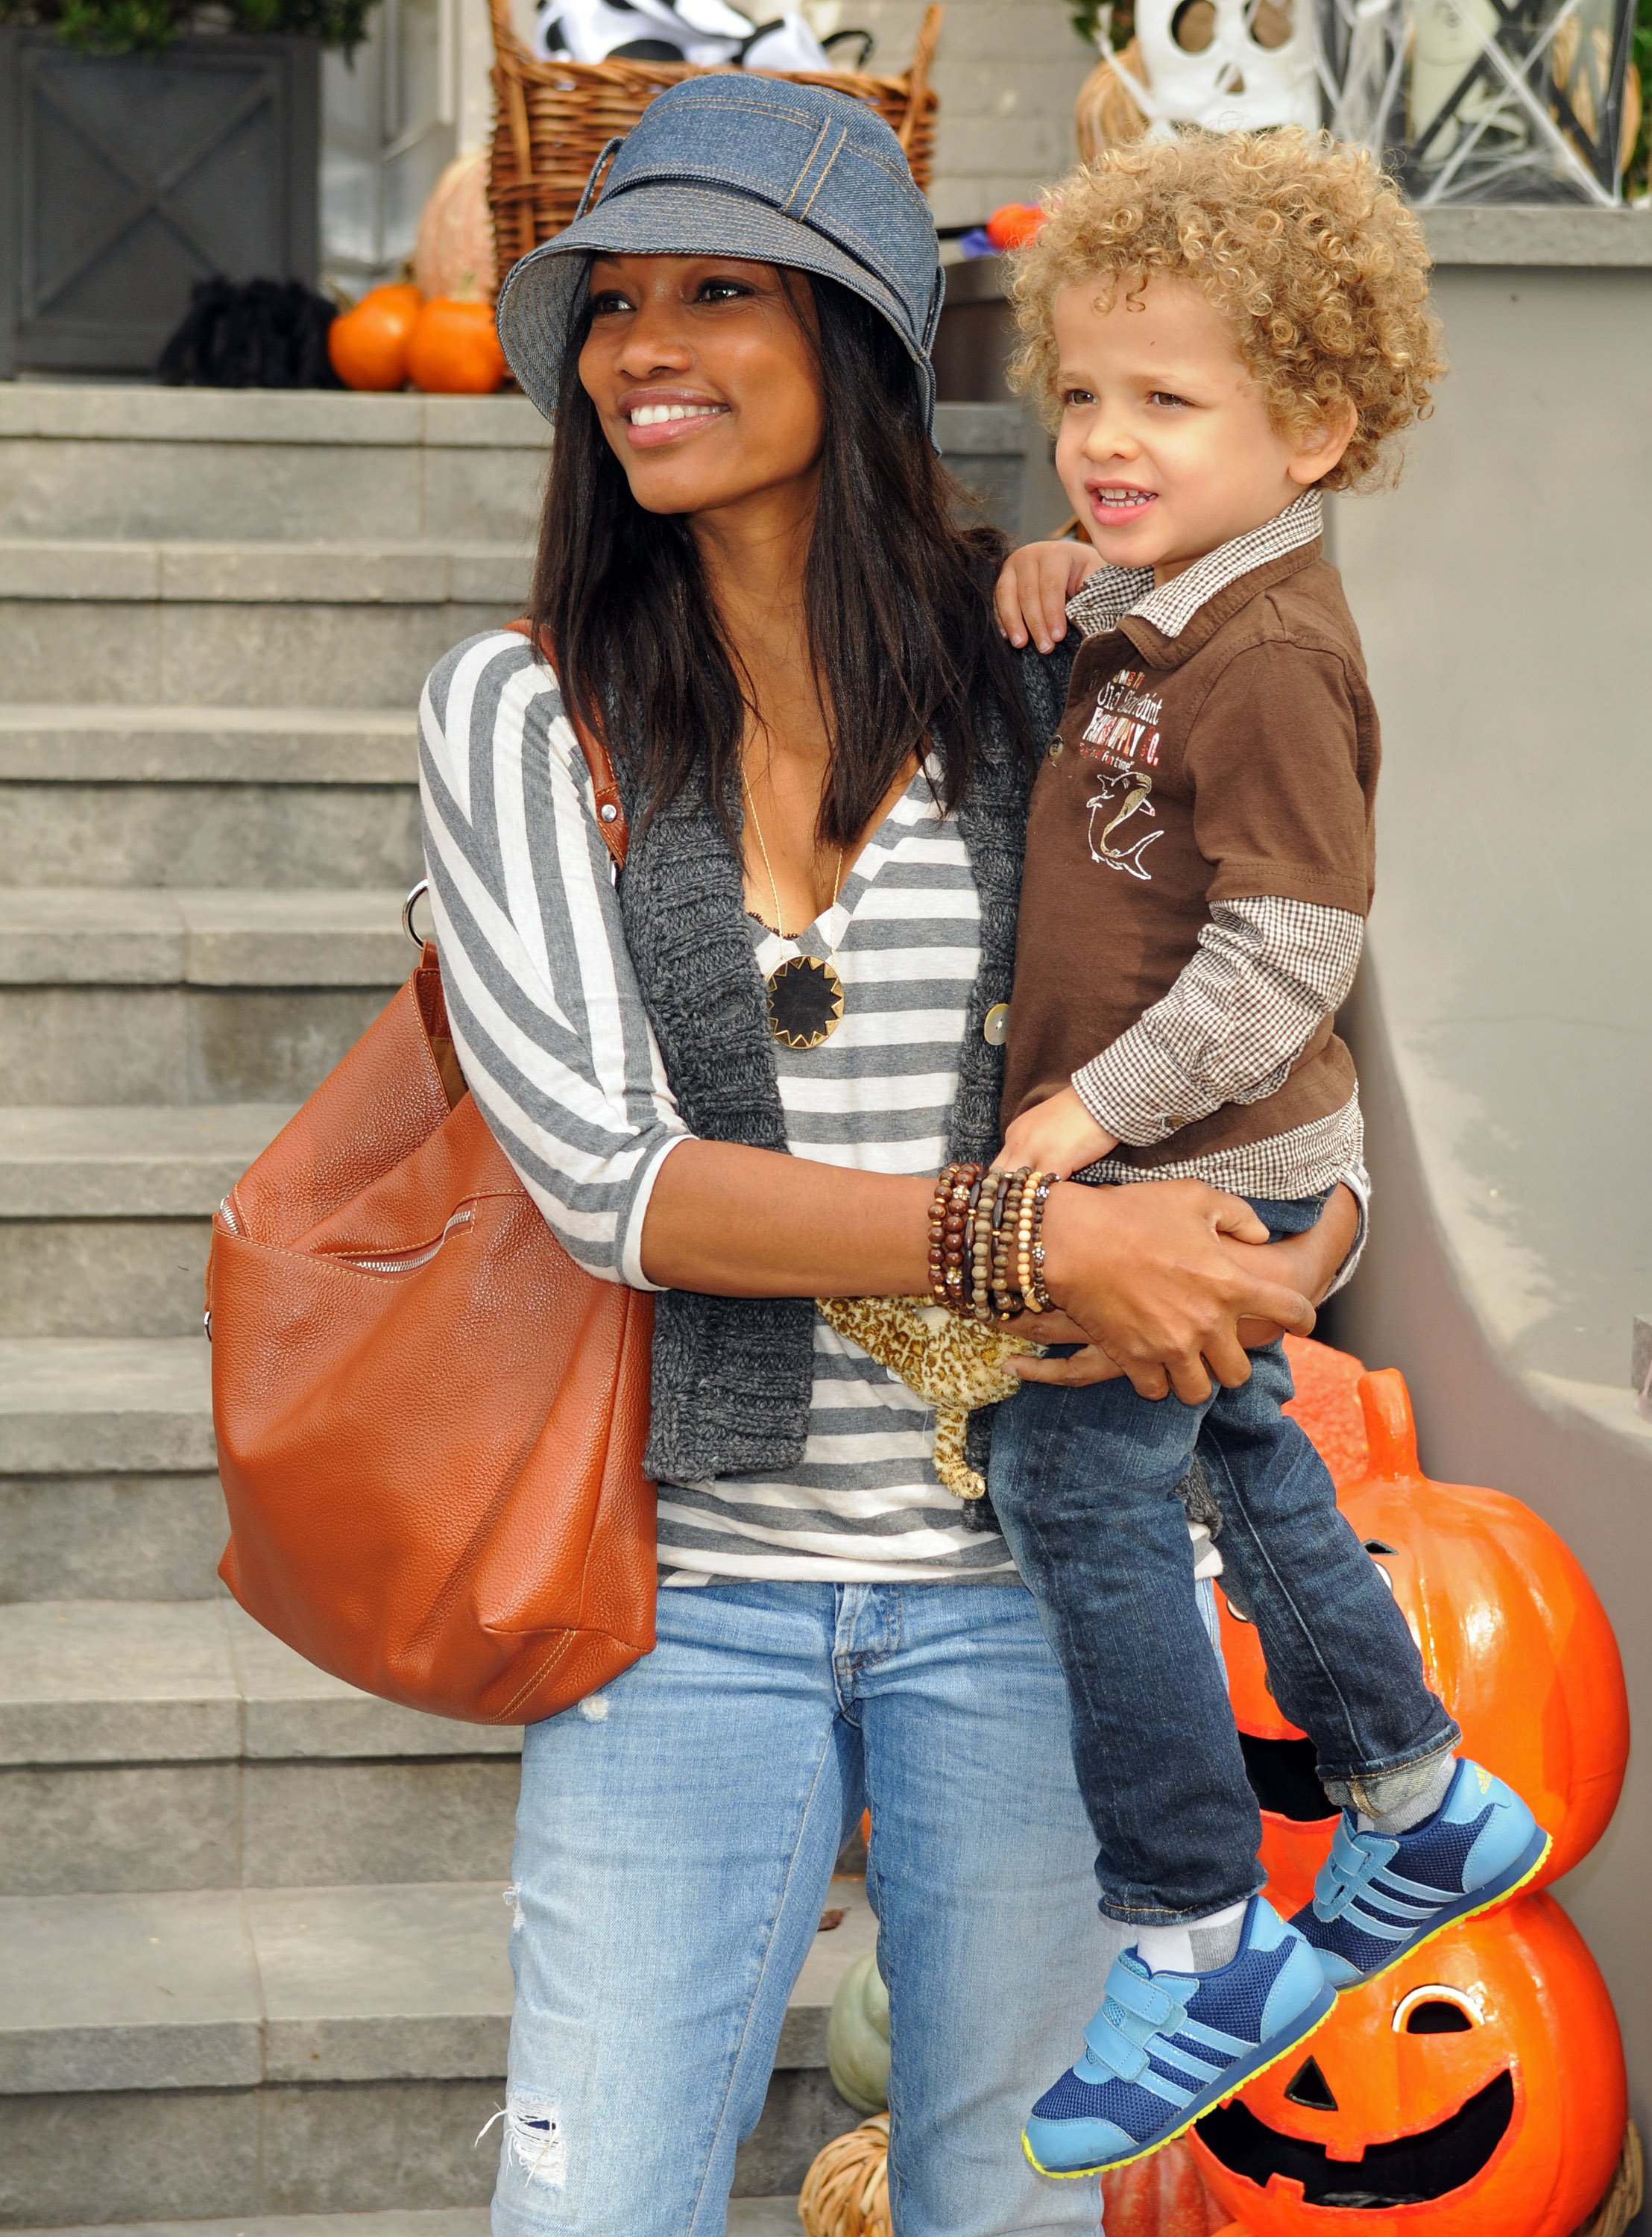 Garcelle Beauvais and her son, Jax Nilon at the Pottery Barn Kids' Halloween Carnival on October 23, 2010. | Source: Getty Images